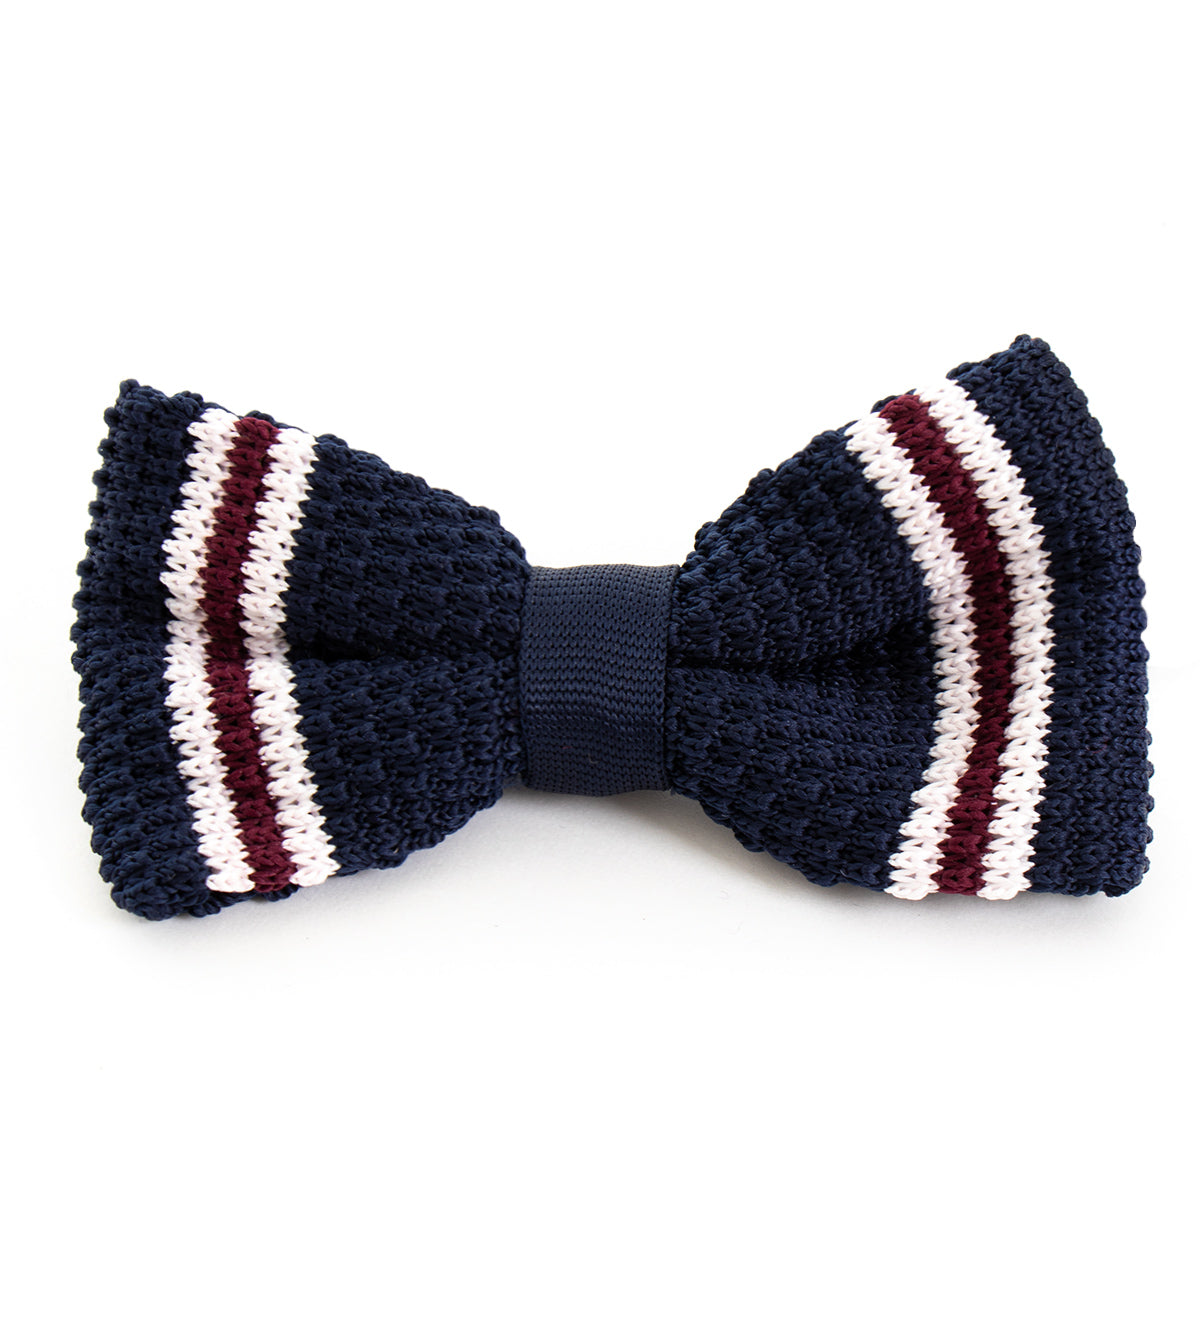 Bow Tie Butterfly Bow Man Unisex Elegant Ceremony Accessory Blue Striped Knitted GIOSAL-CP1095A 